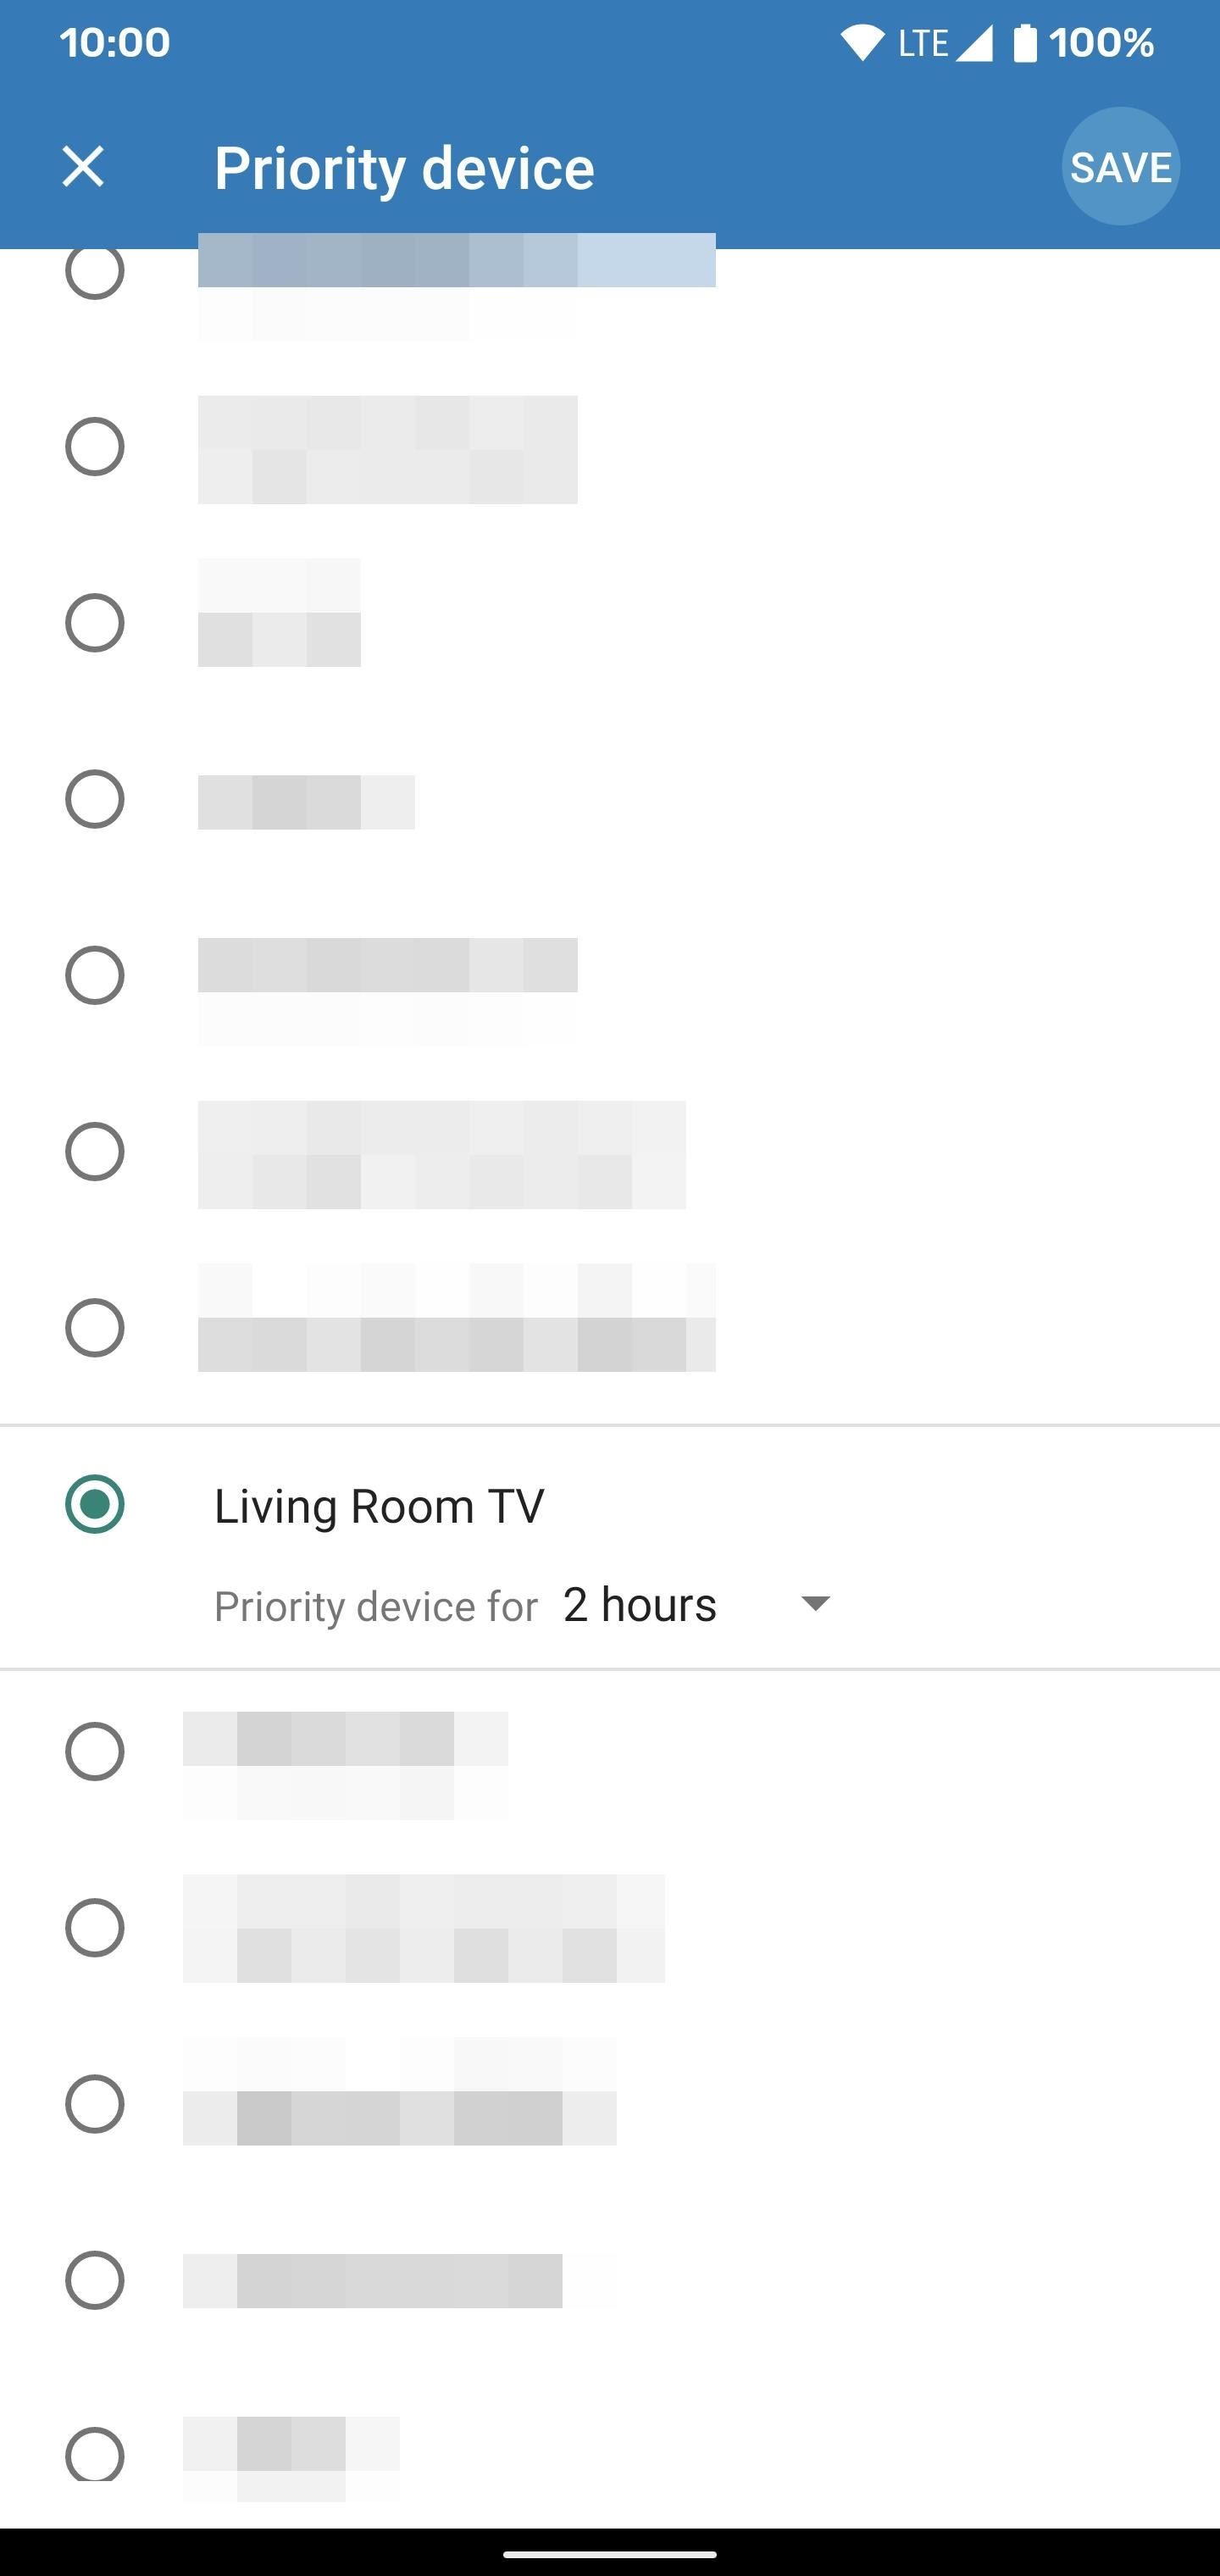 How to Give One Device More Bandwidth on Your Google Wifi or Nest Wifi Network